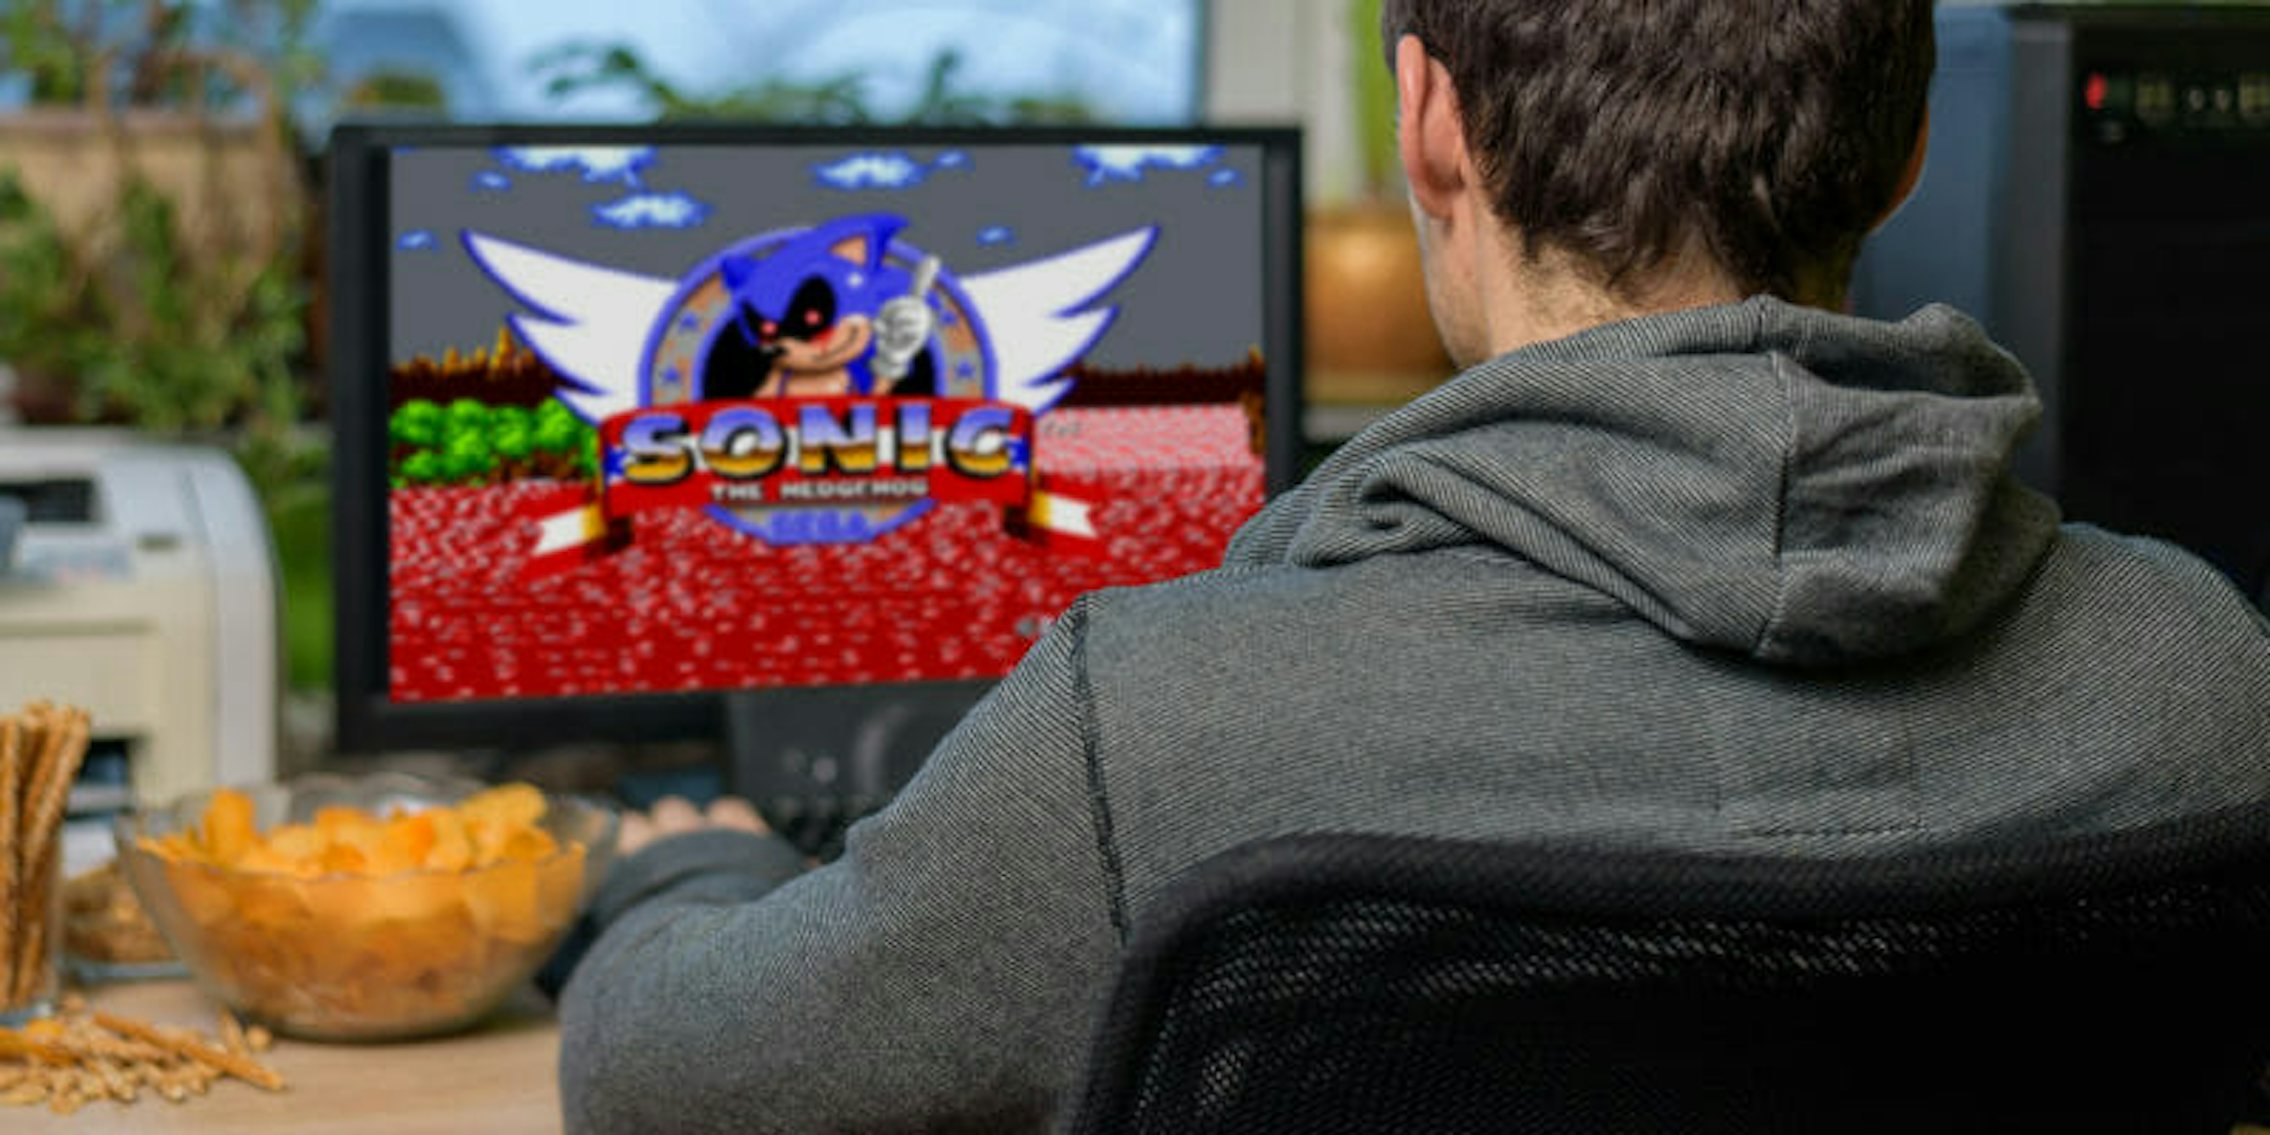  Review - Only Sonic.EXE game I actually like